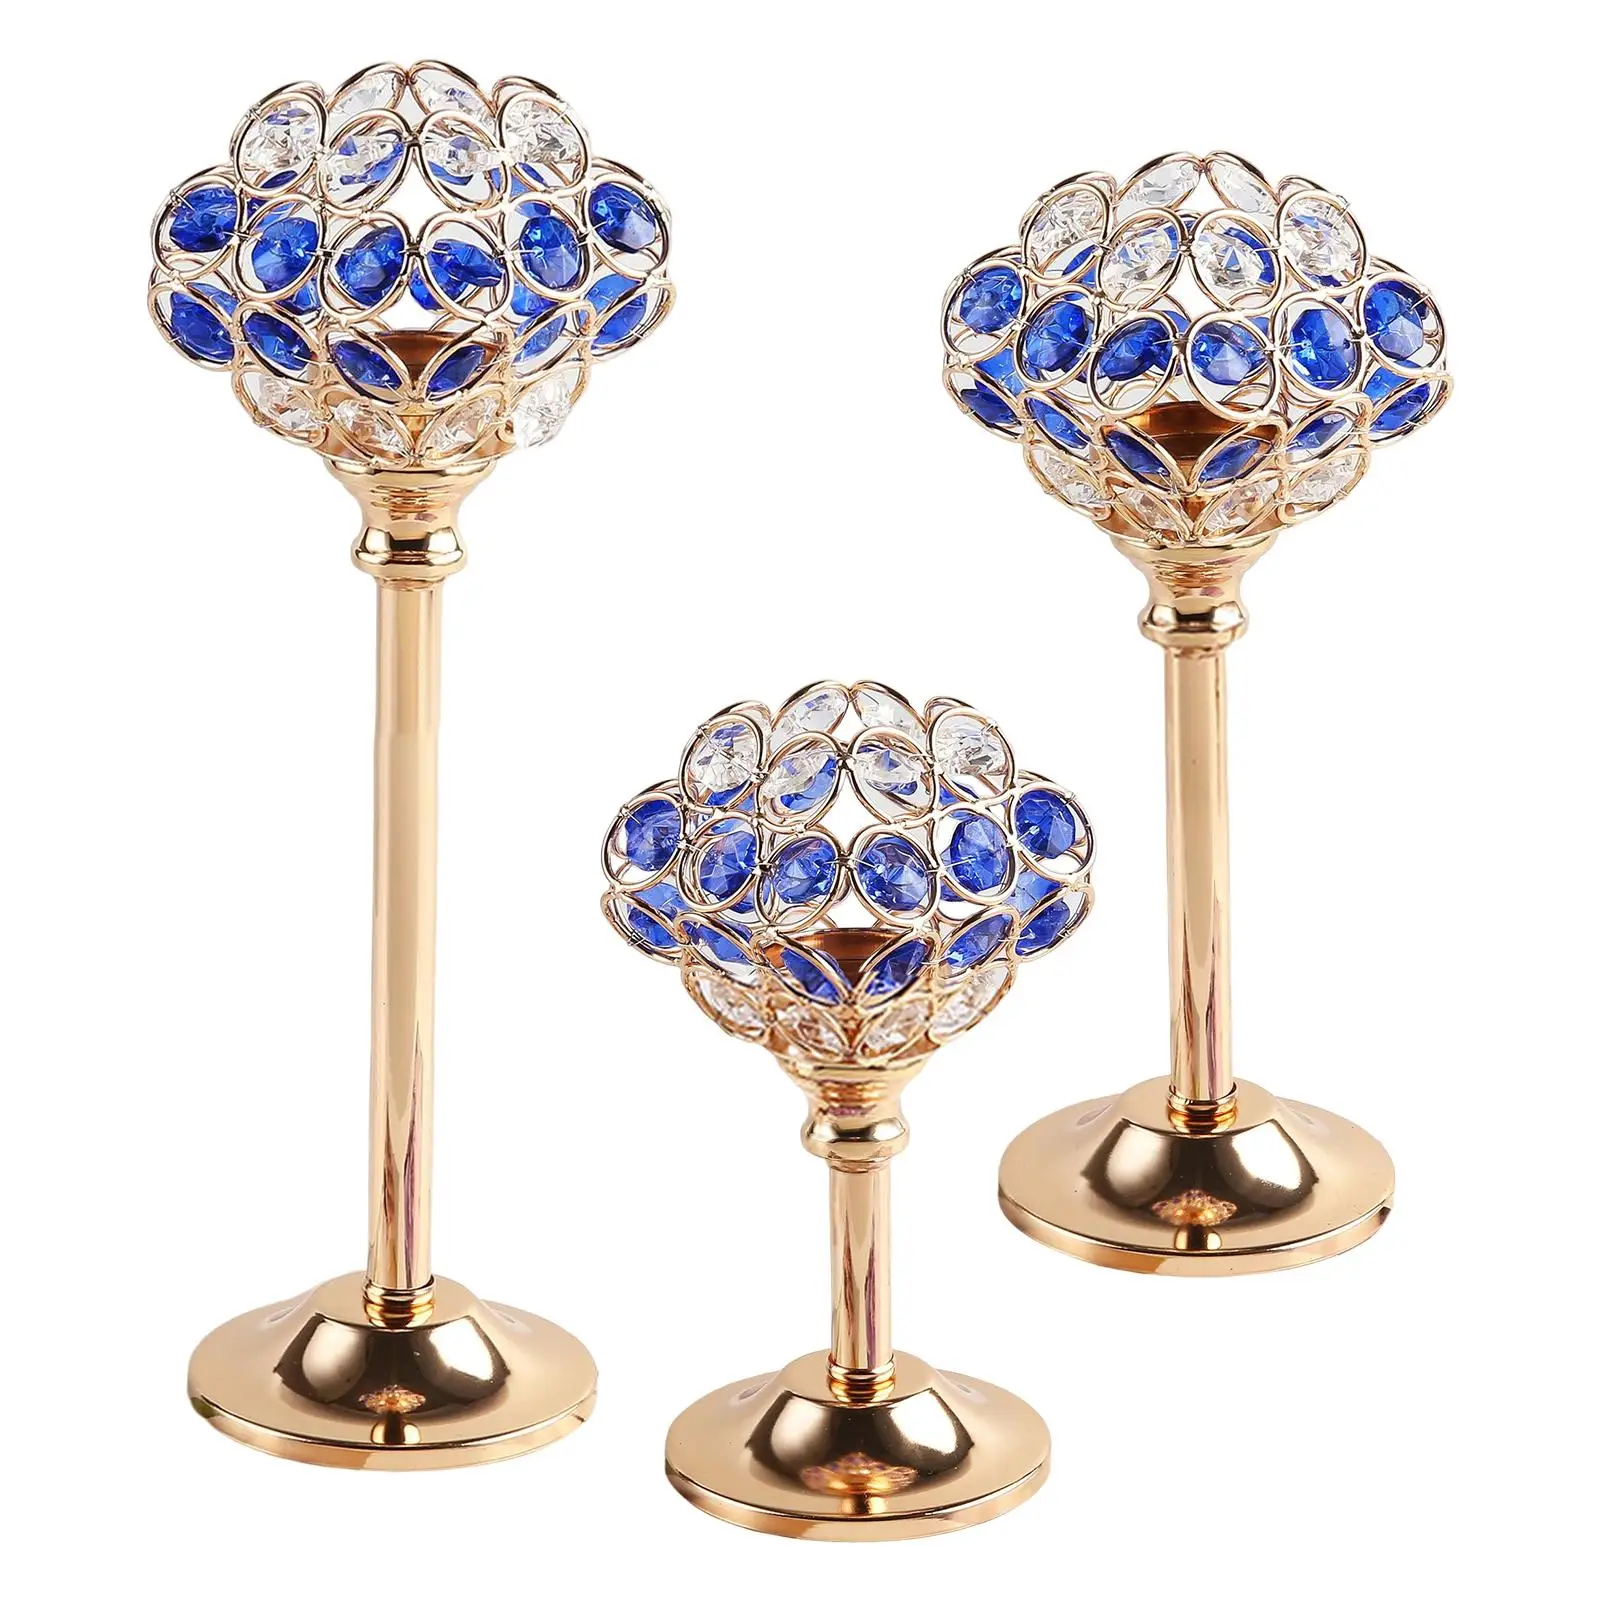 Luxury Candlestick Stand Plated Blue Crystal Candle Holder for Decorative